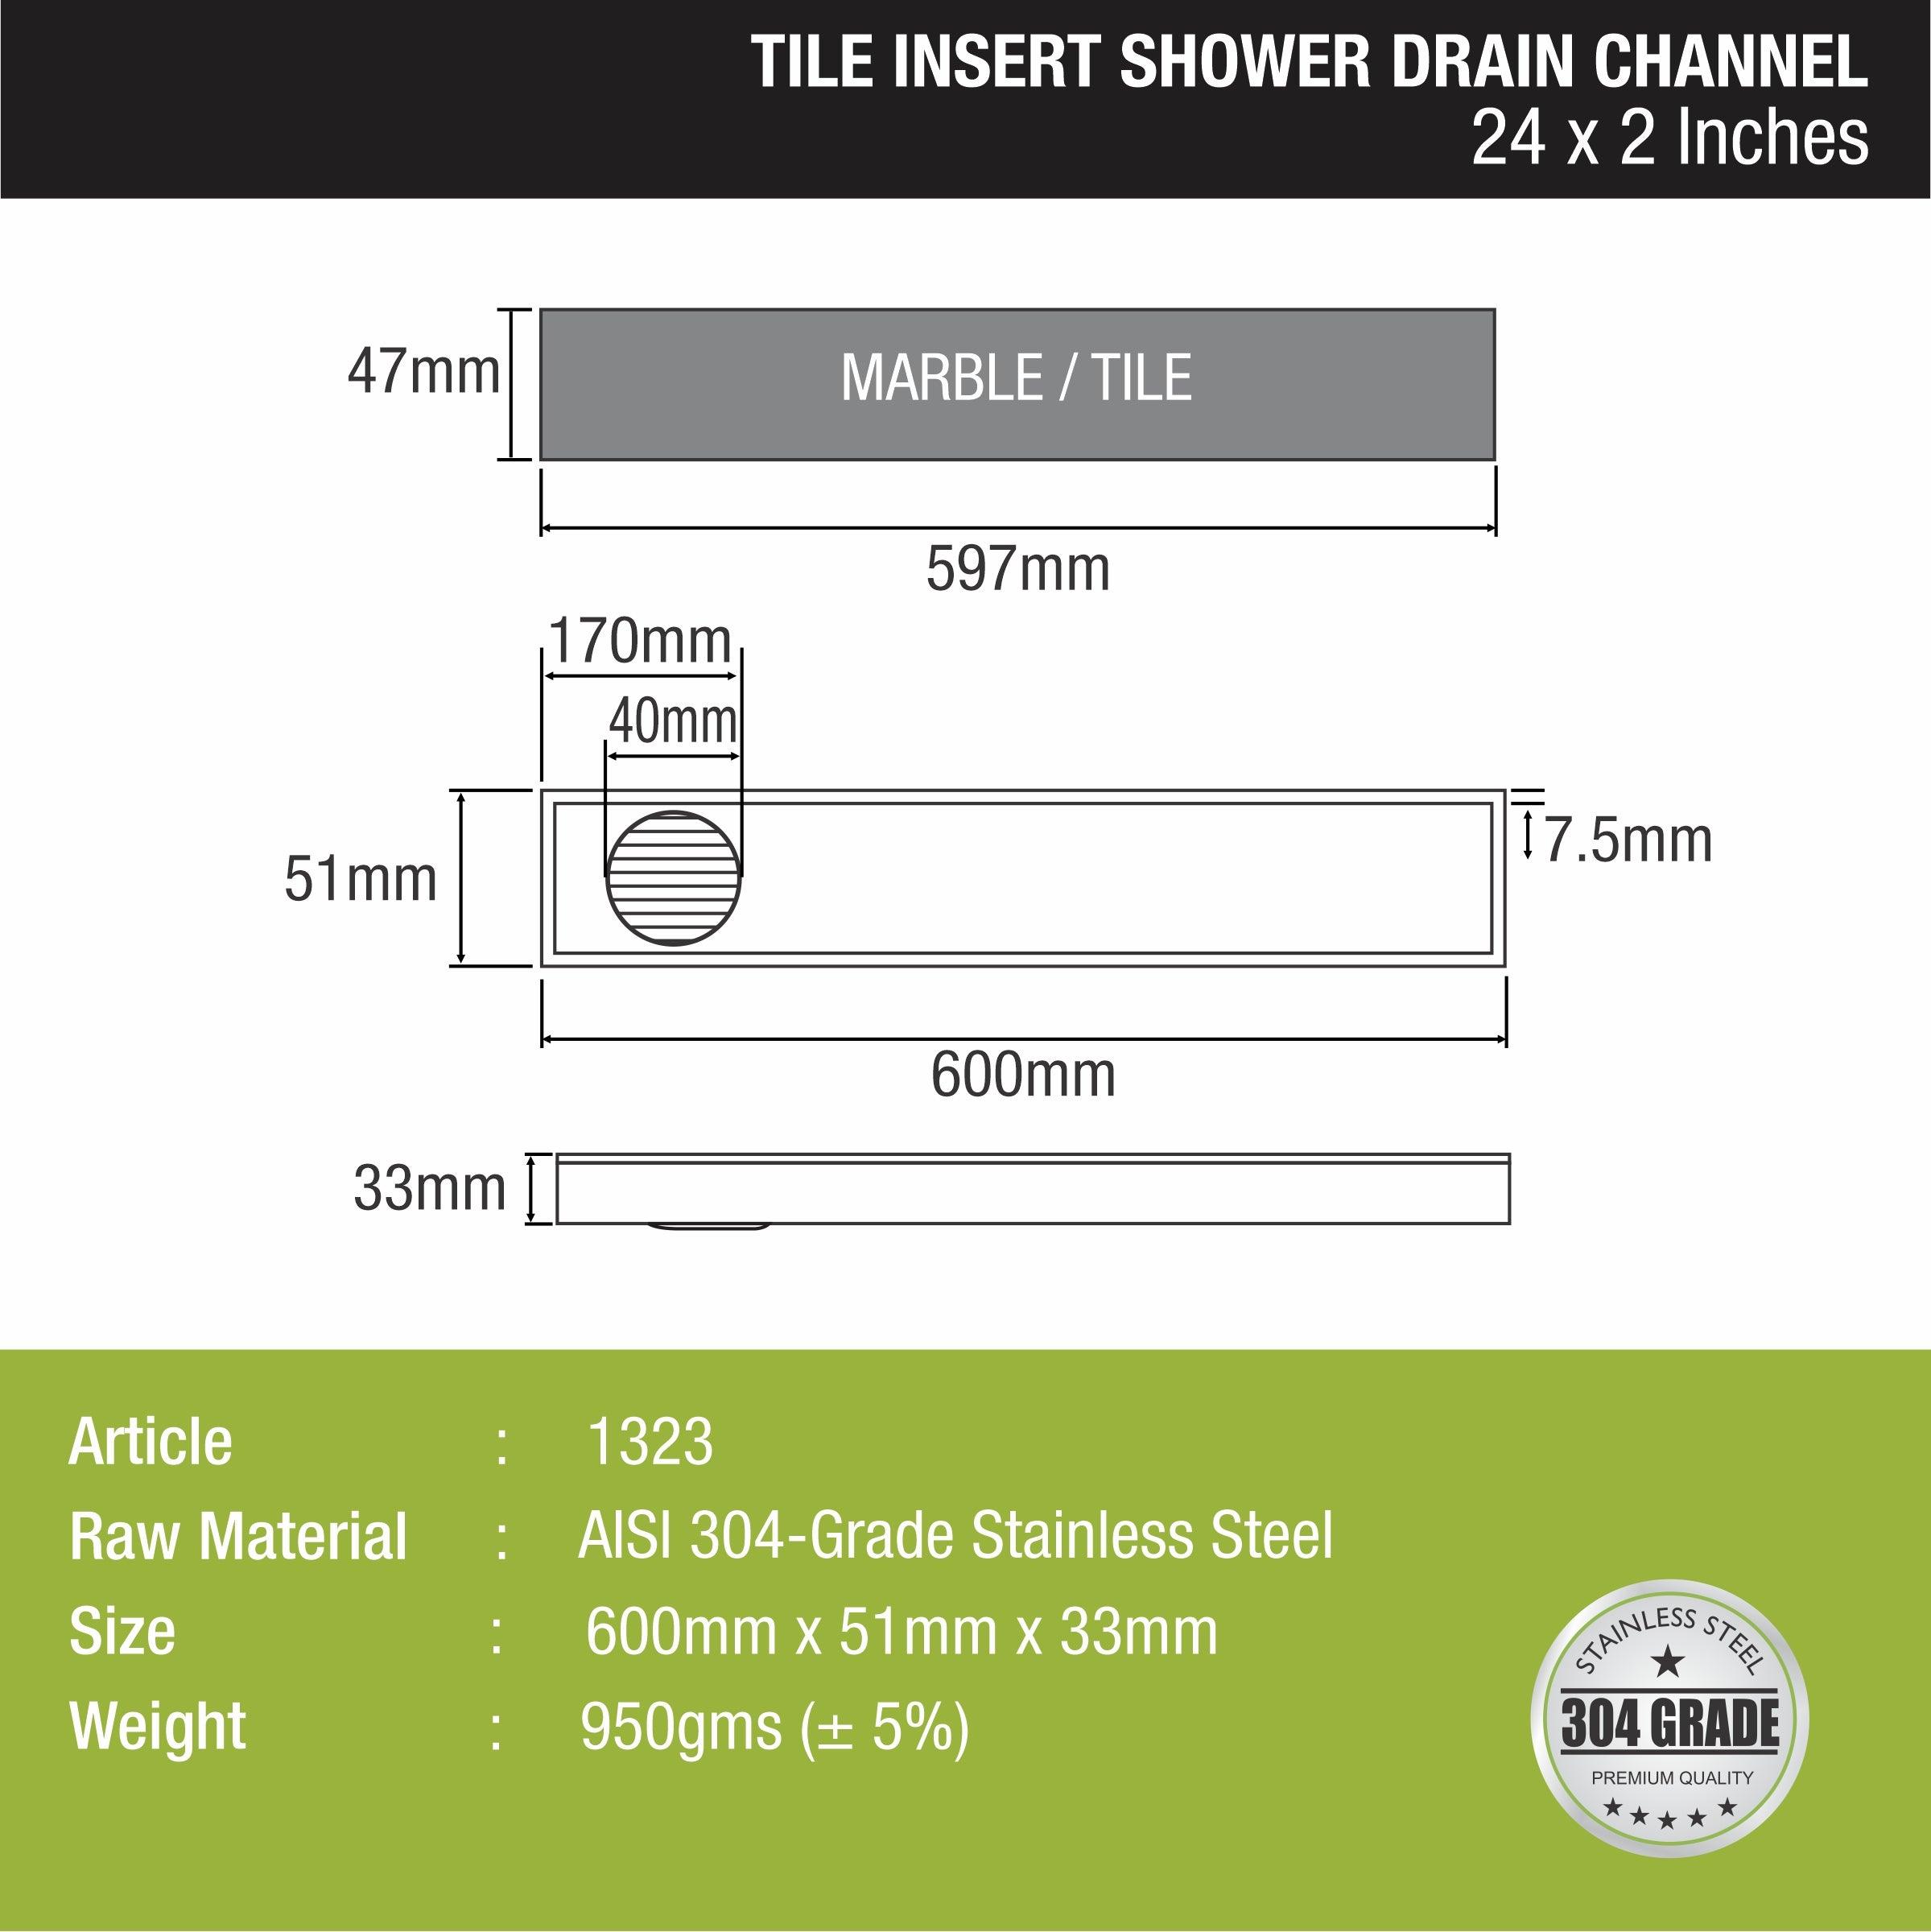 Tile Insert Shower Drain Channel (24 x 2 Inches) sizes and dimensions